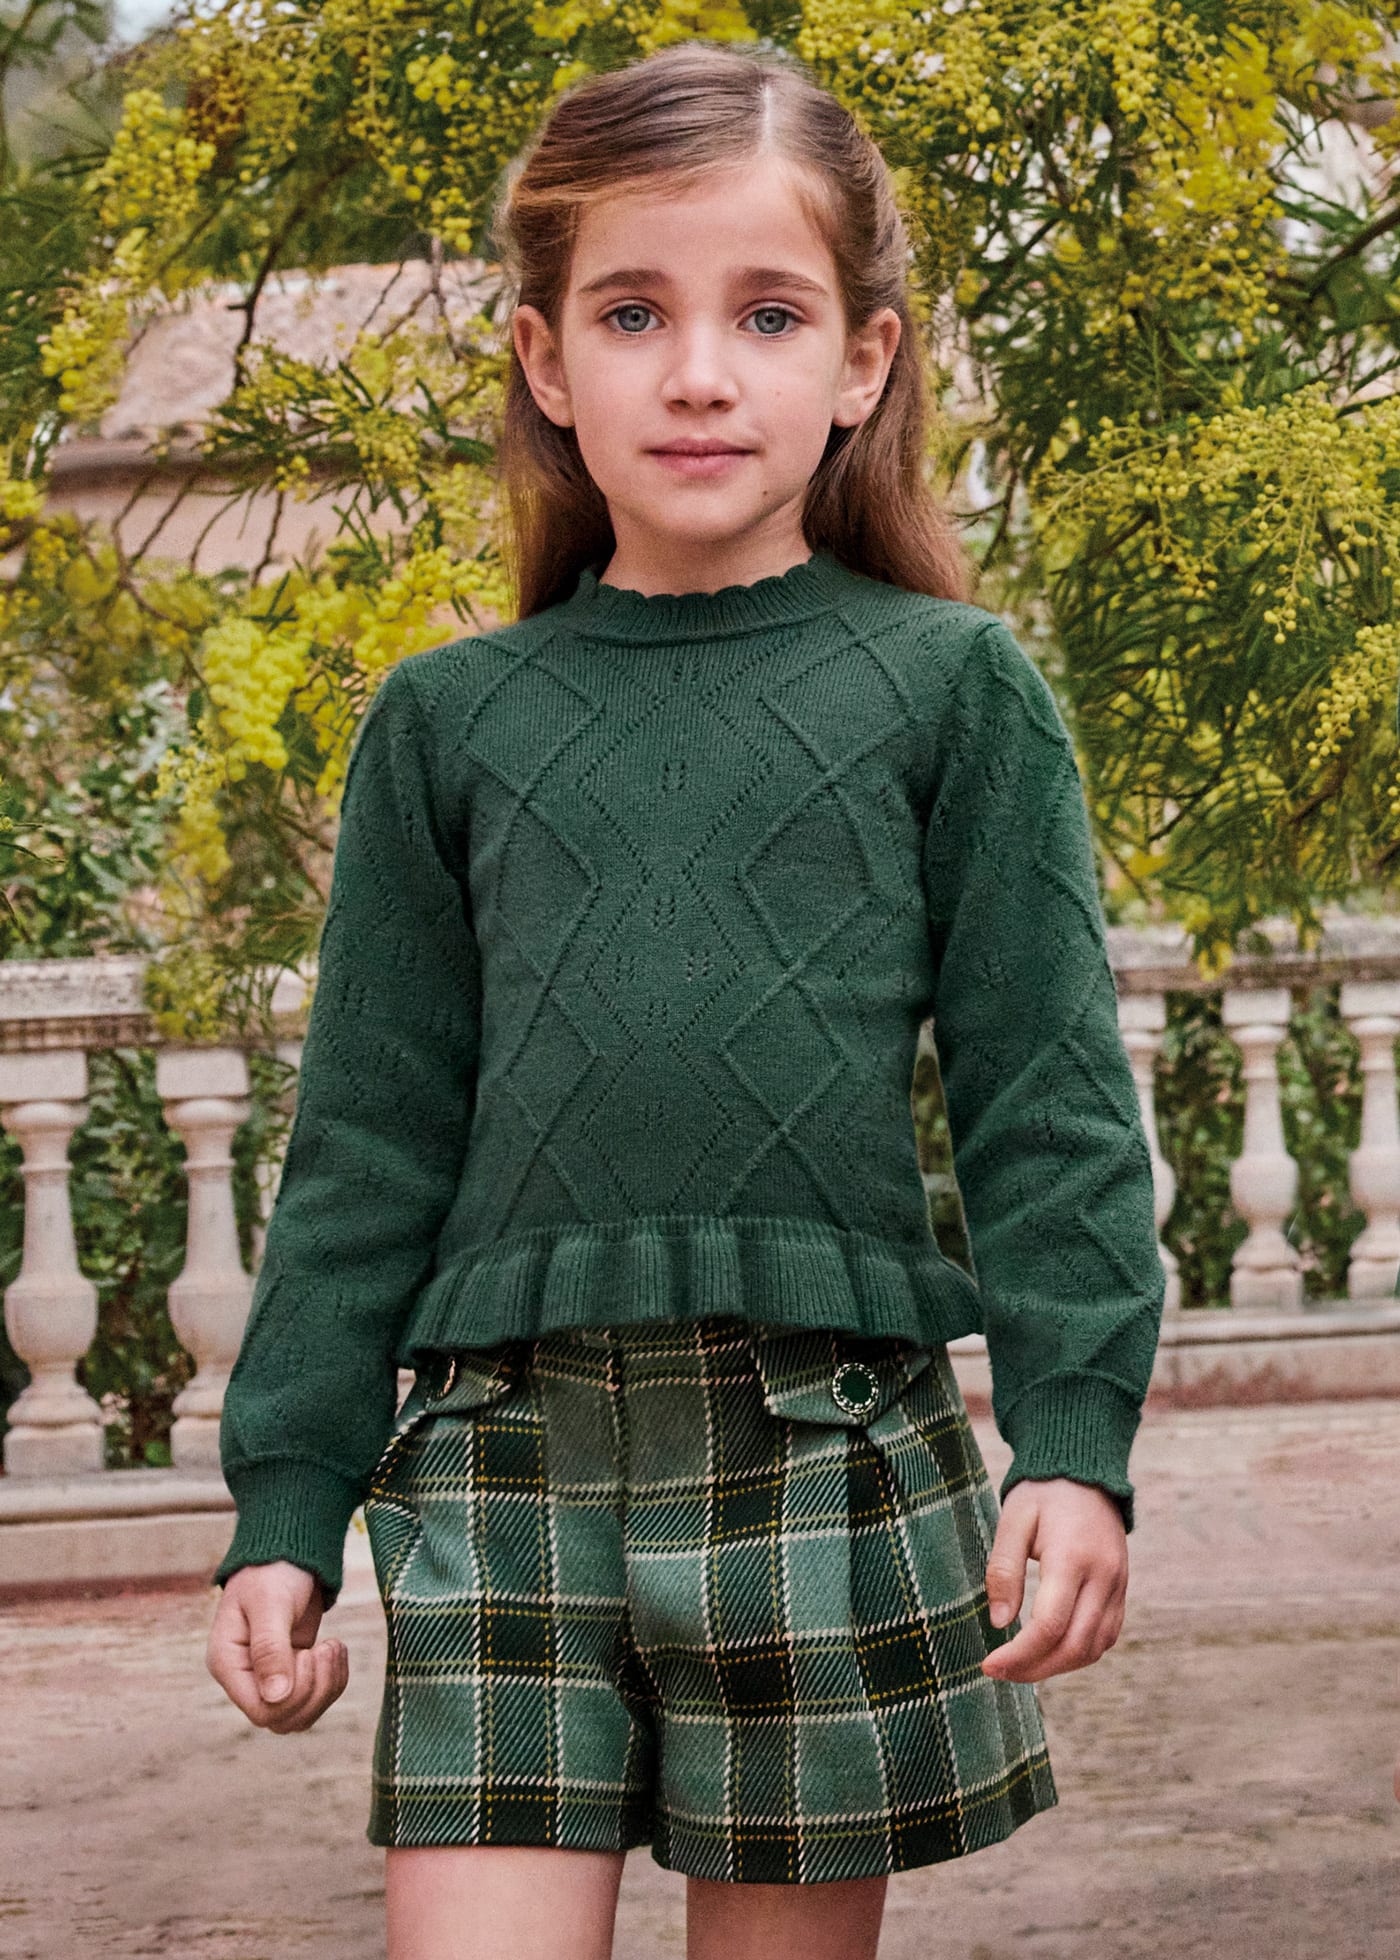 Girl tricot structured jumper